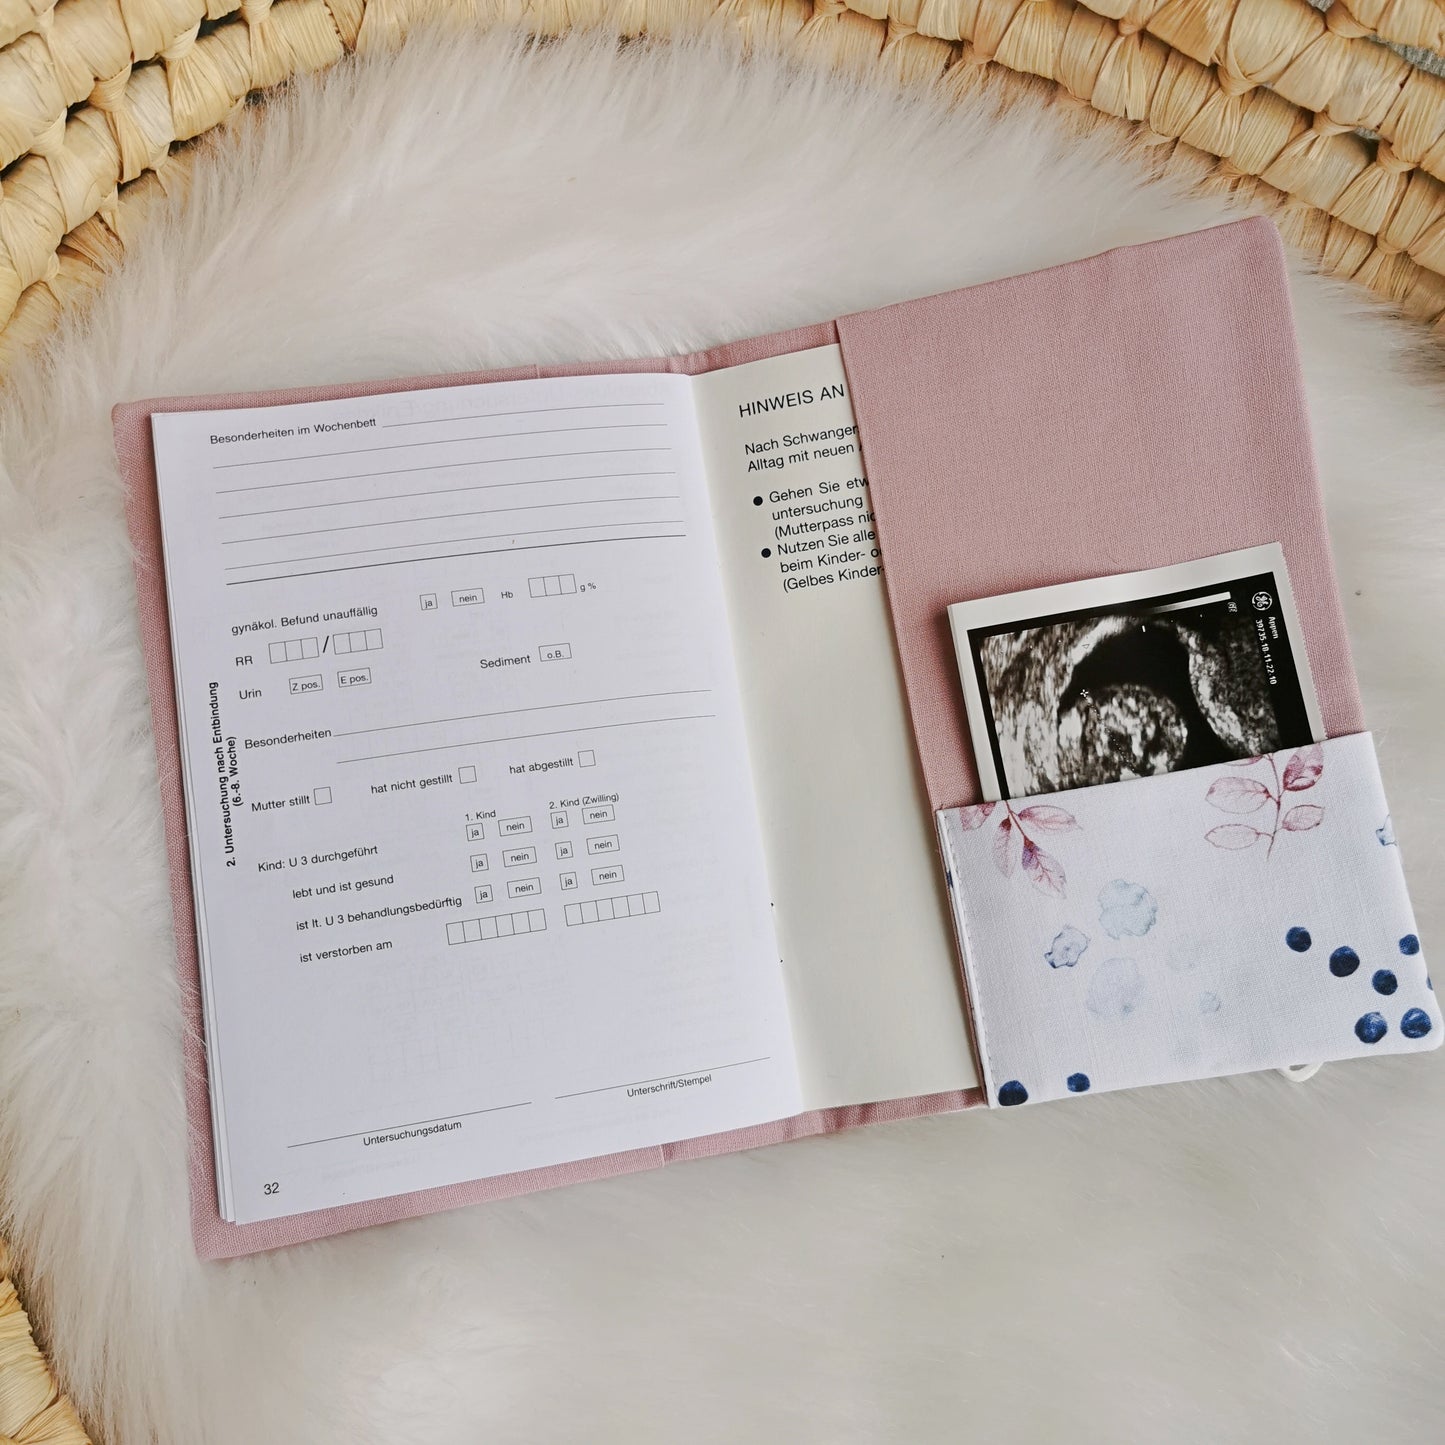 Maternity Passport Cover "Leaves &amp; Dots"